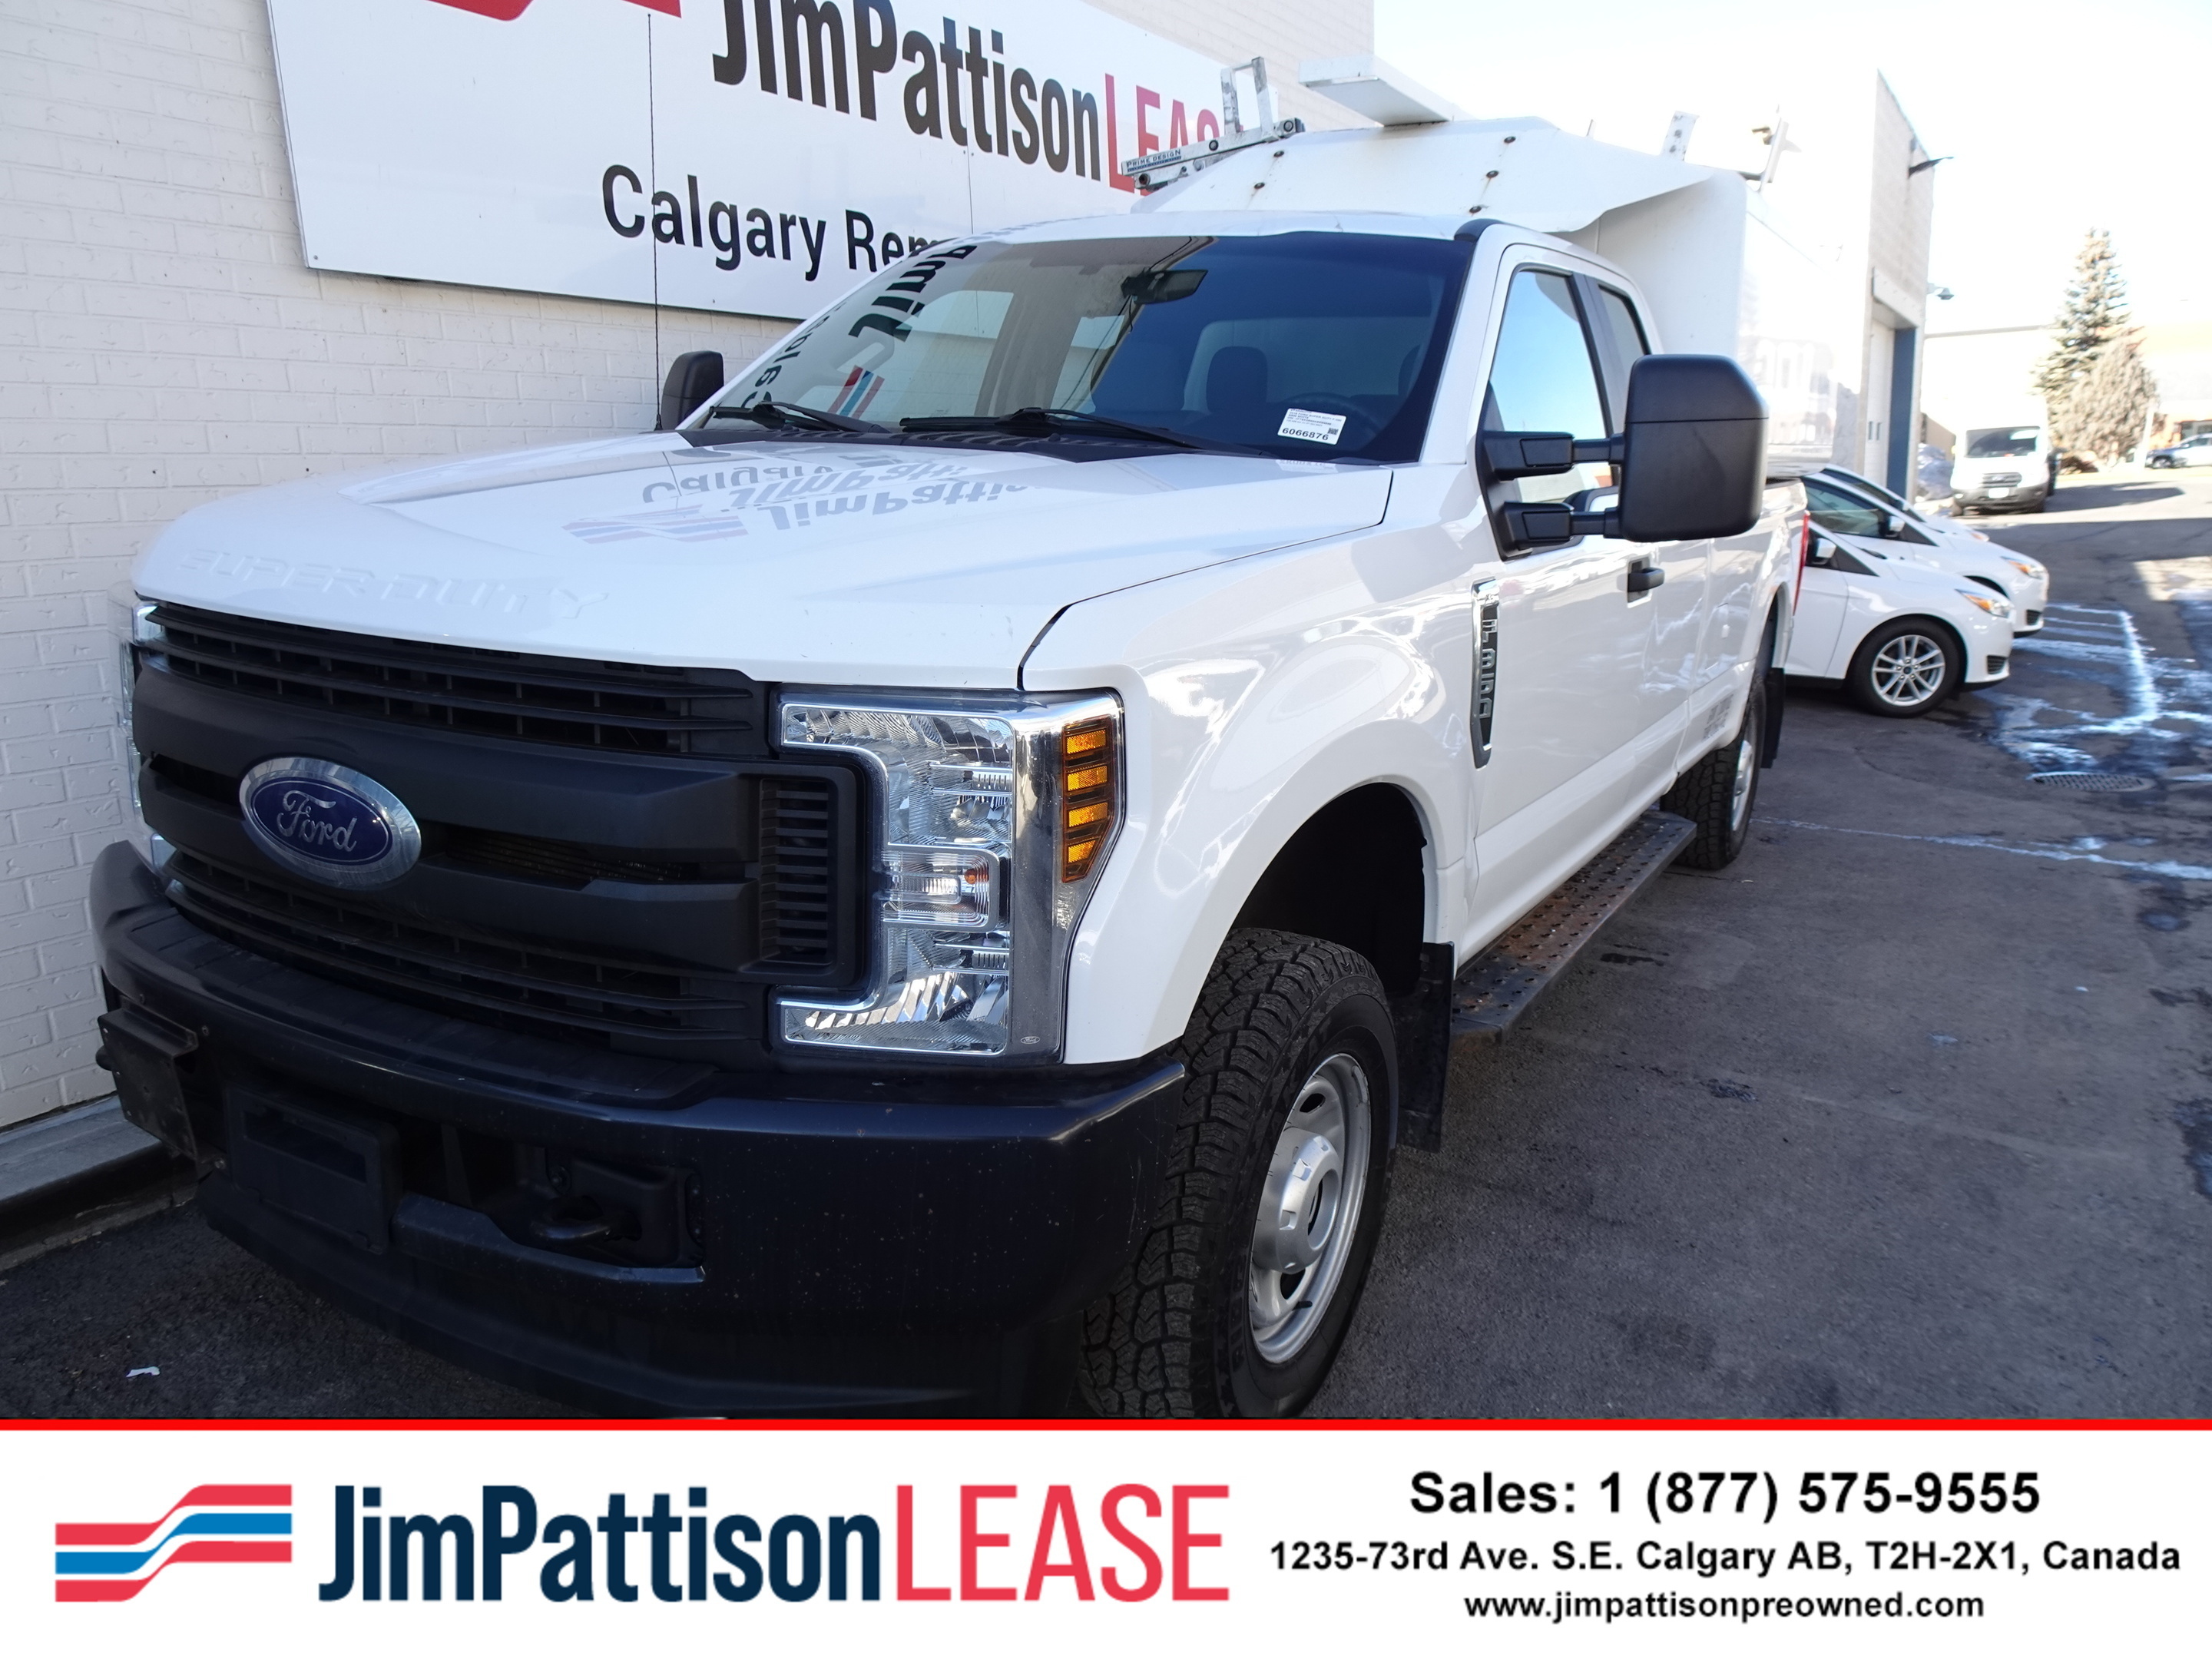 2019 Ford F-350 XL 4X4 Extended Cab w/Full Service Body & Camera.